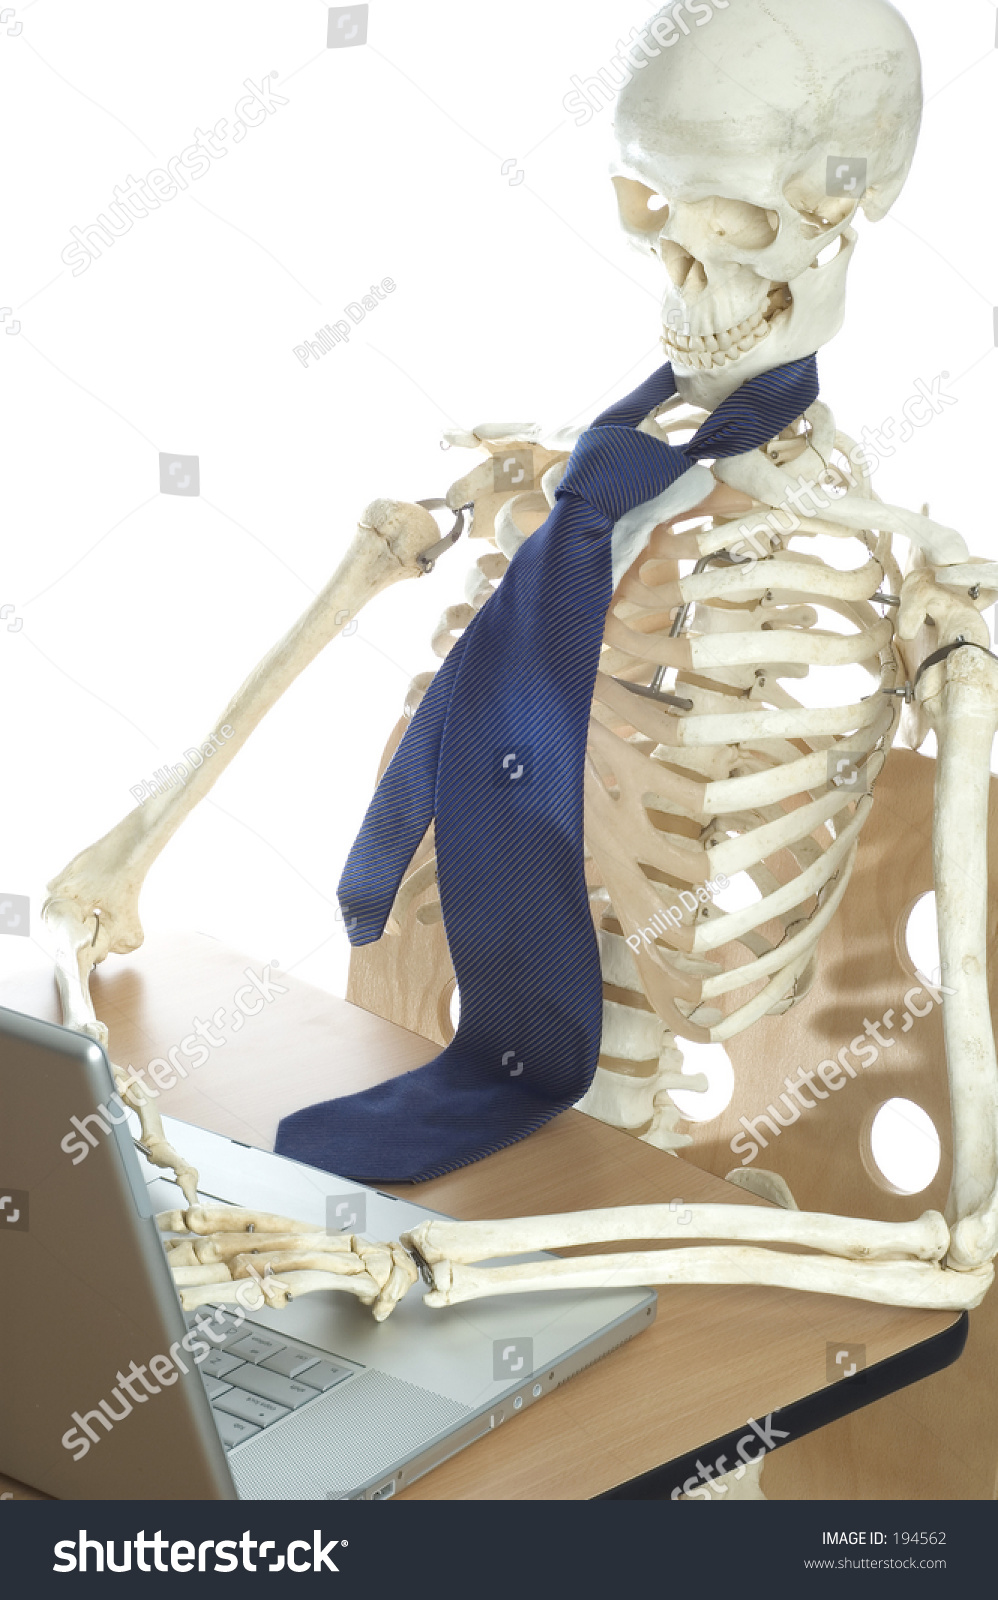 stock-photo-a-skeleton-sits-at-a-desk-typing-on-a-laptop-computer-194562.jpg